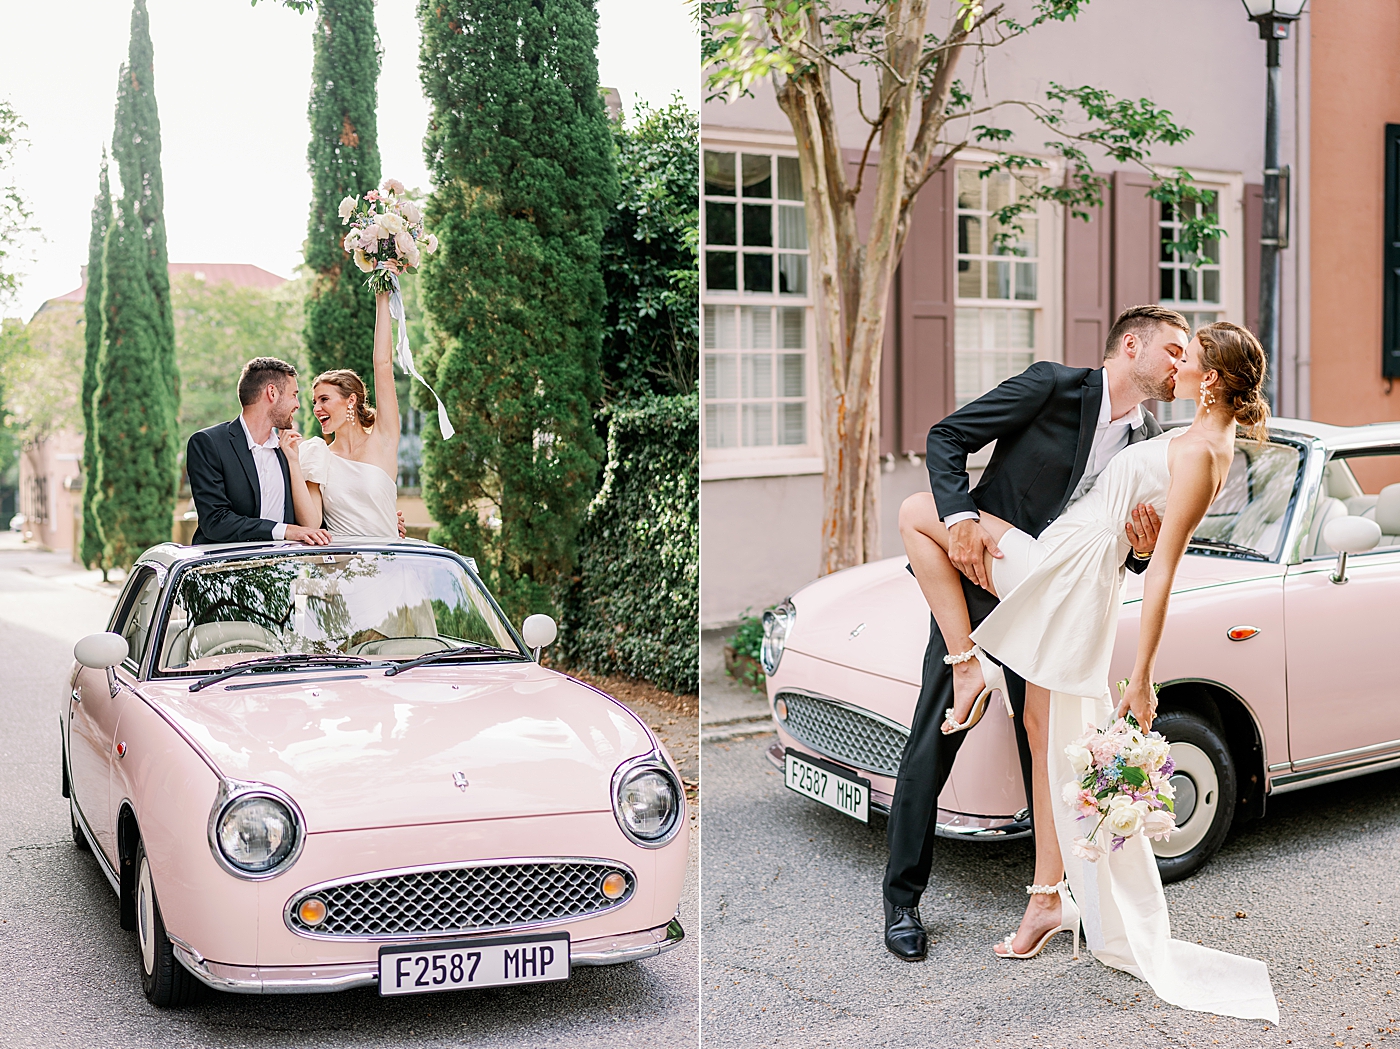 Bride and groom in pink convertible | Images by Annie Laura Photo